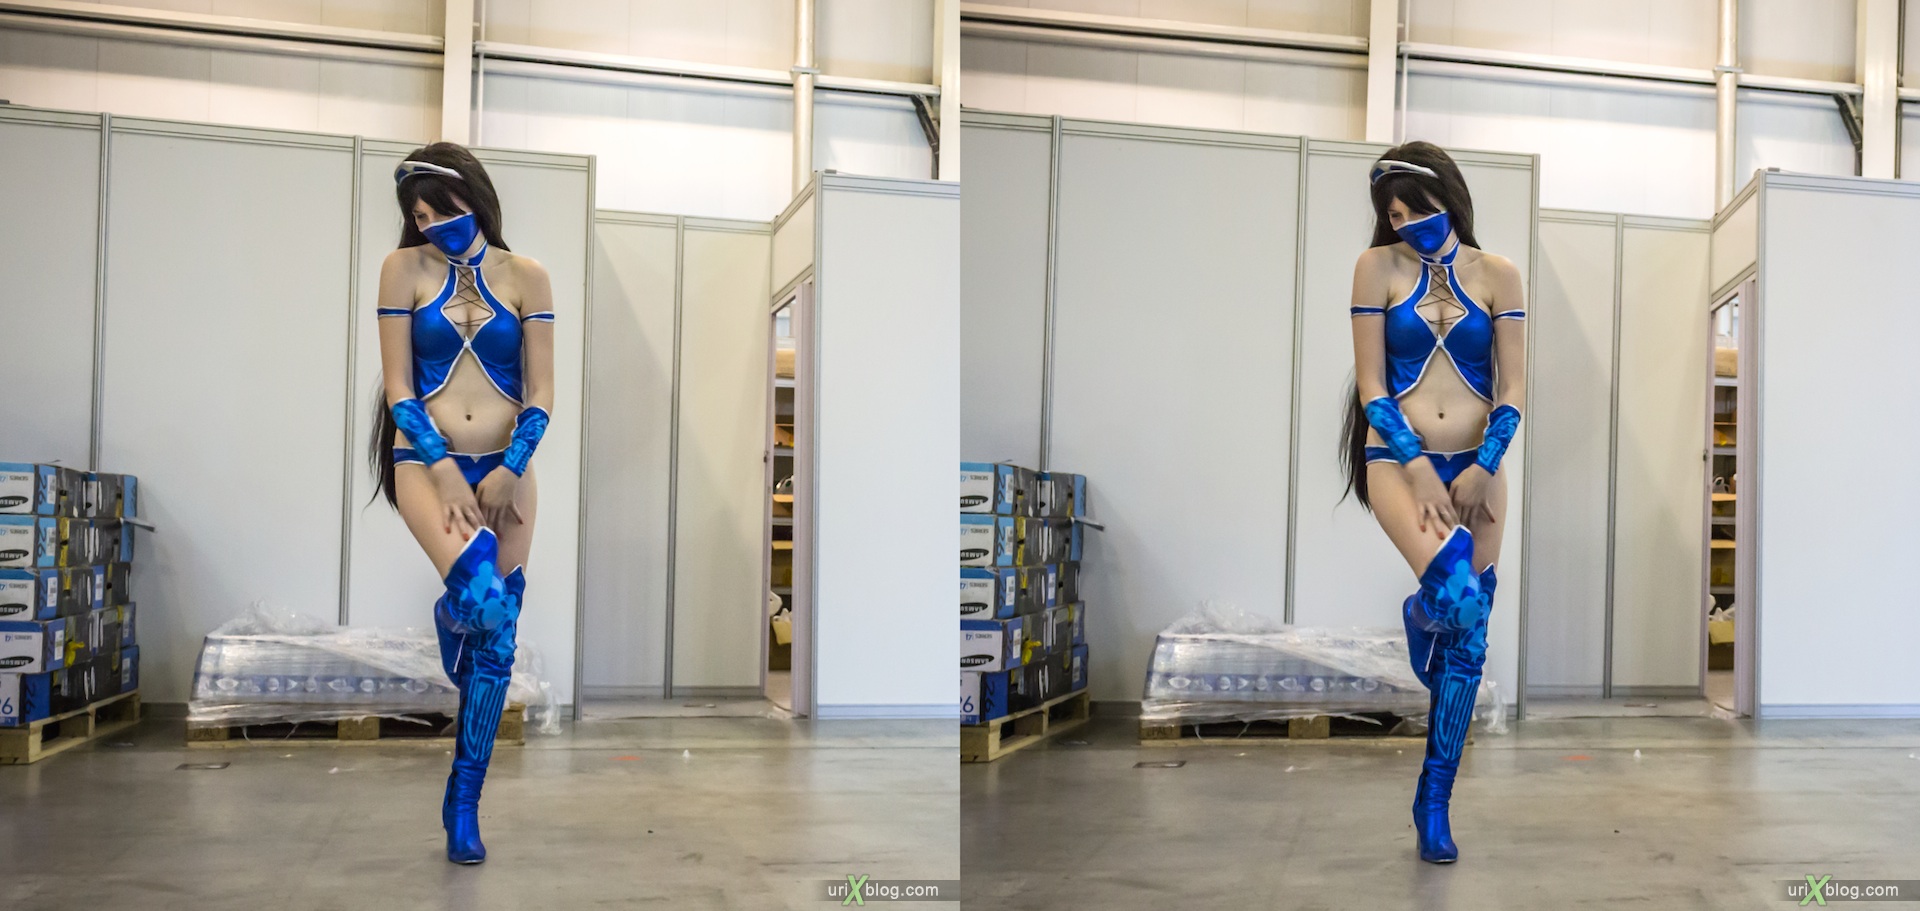 2012, Gameworld 2012 at Moscow, girls, models, Crocus Expo, 3D, stereo pair, cross-eyed, crossview, cross view stereo pair